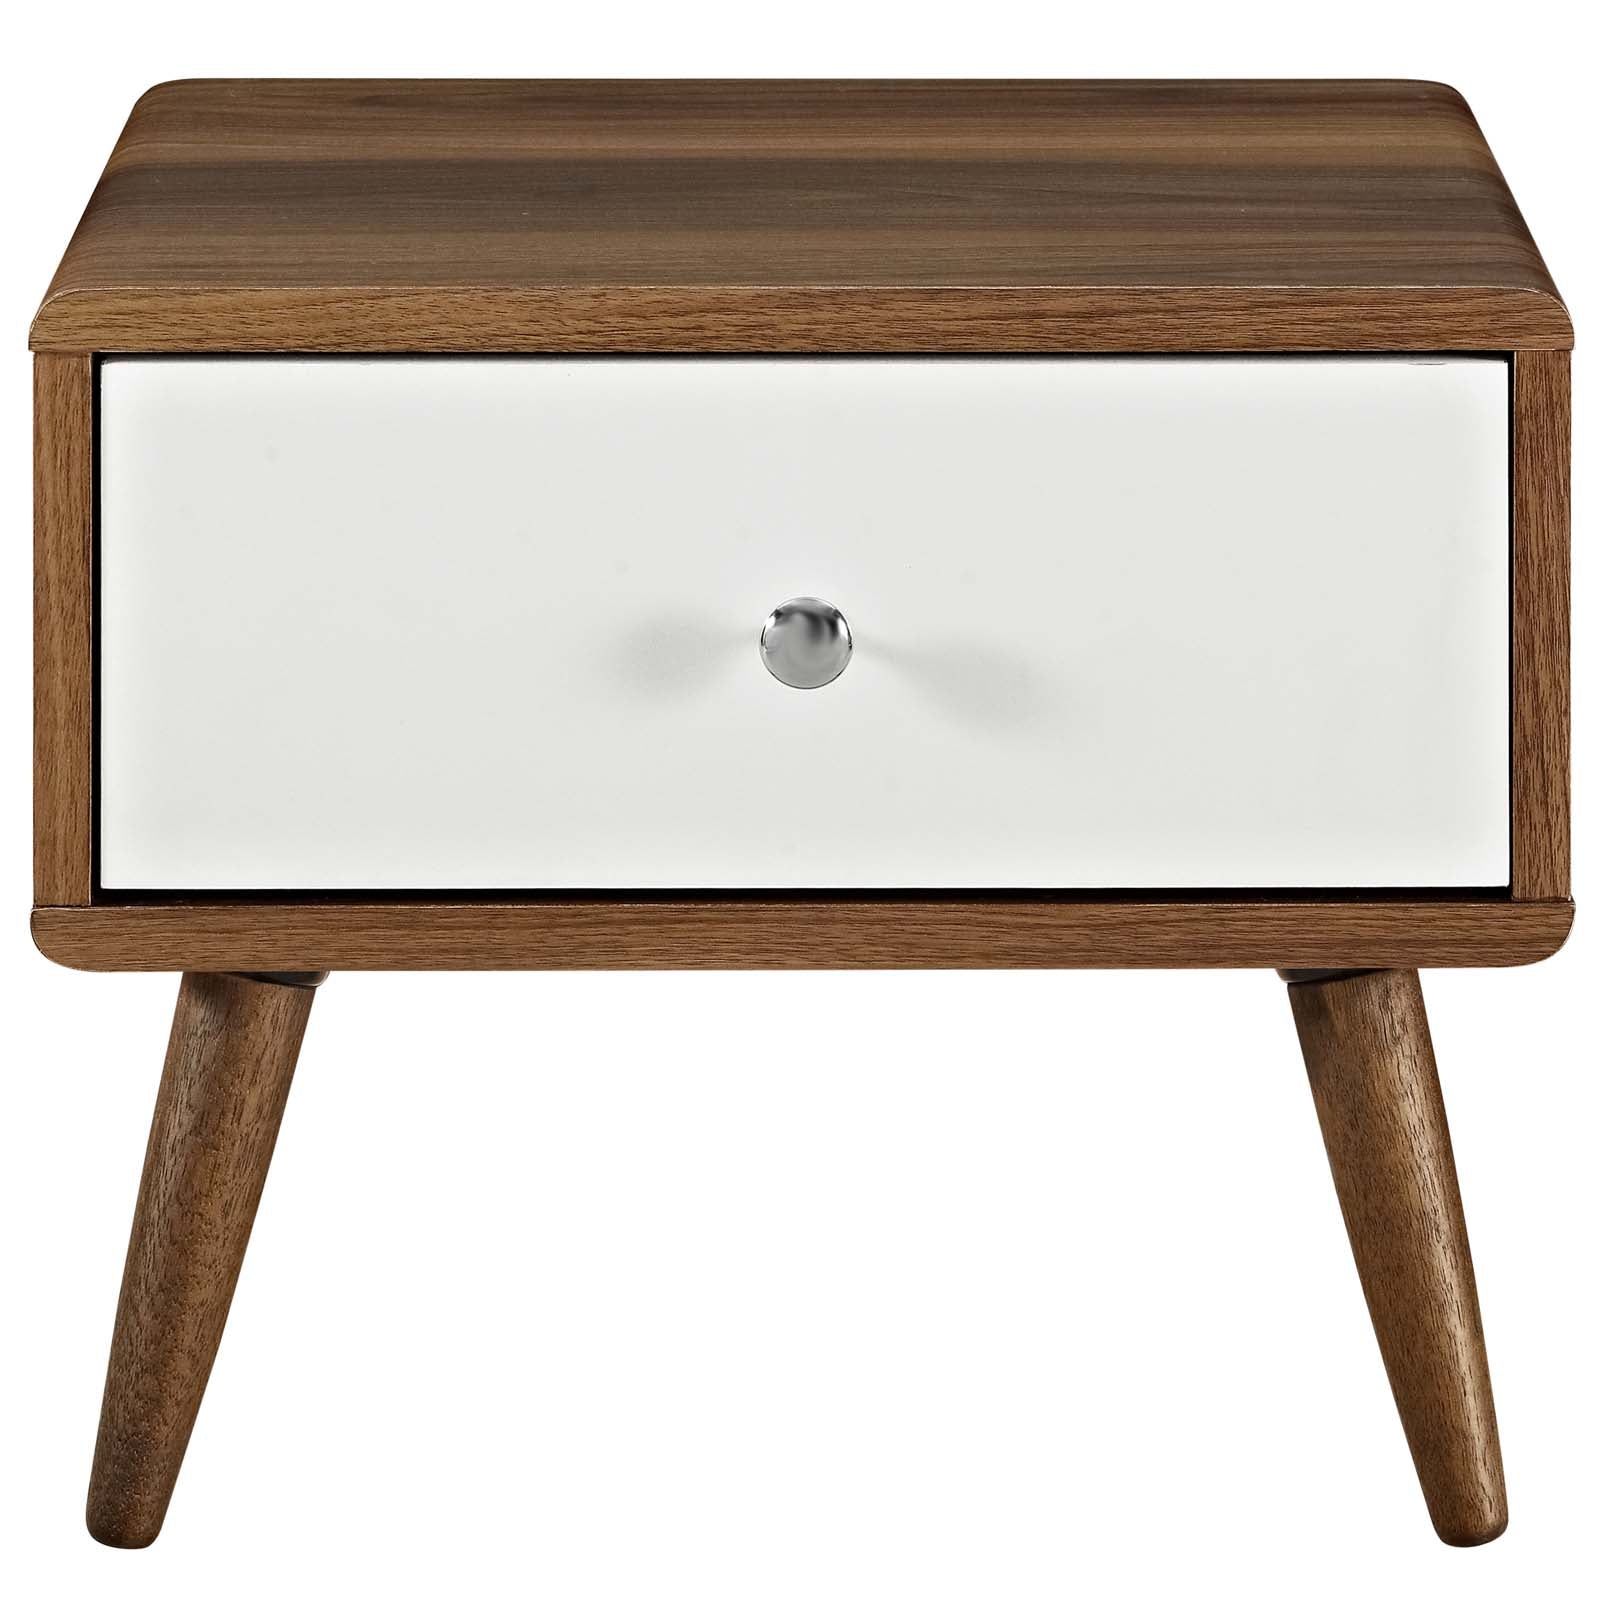 Modway Nightstands & Side Tables - Transmit Nightstand Walnut And White